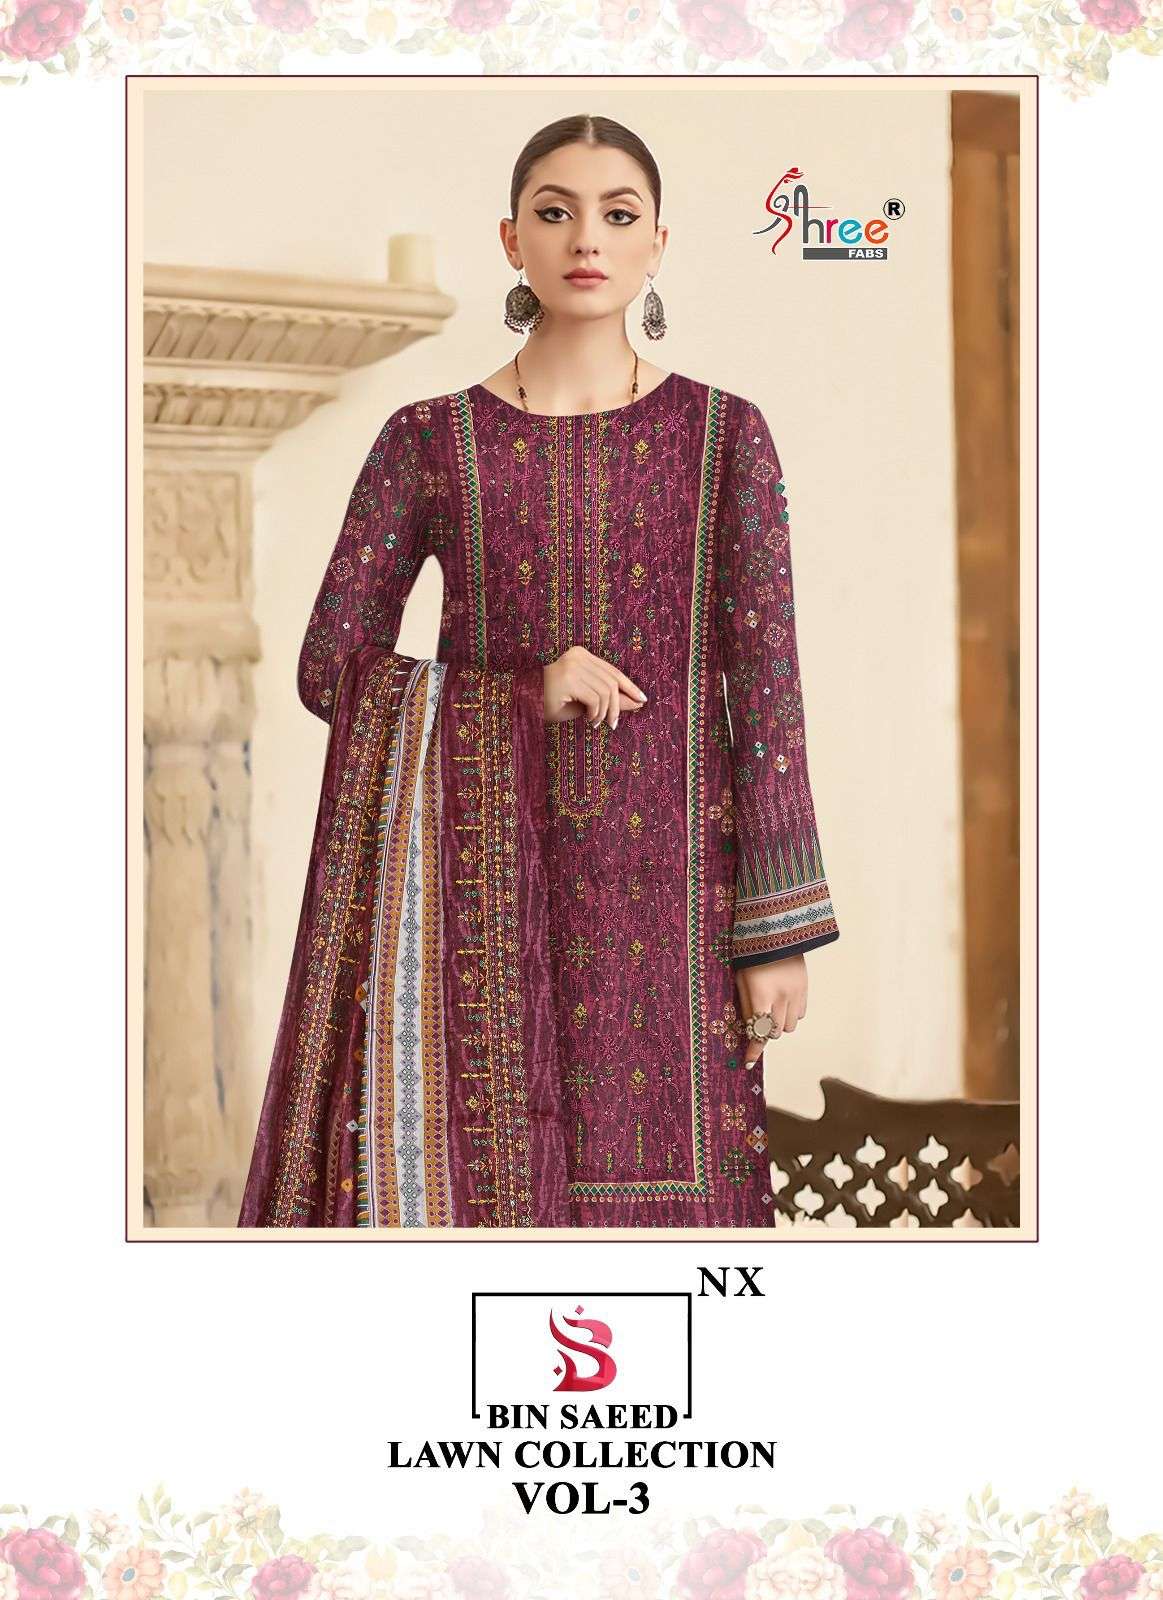 shree fabs bin saeed lawn collection vol 3 nx designer pakistani suit collection 